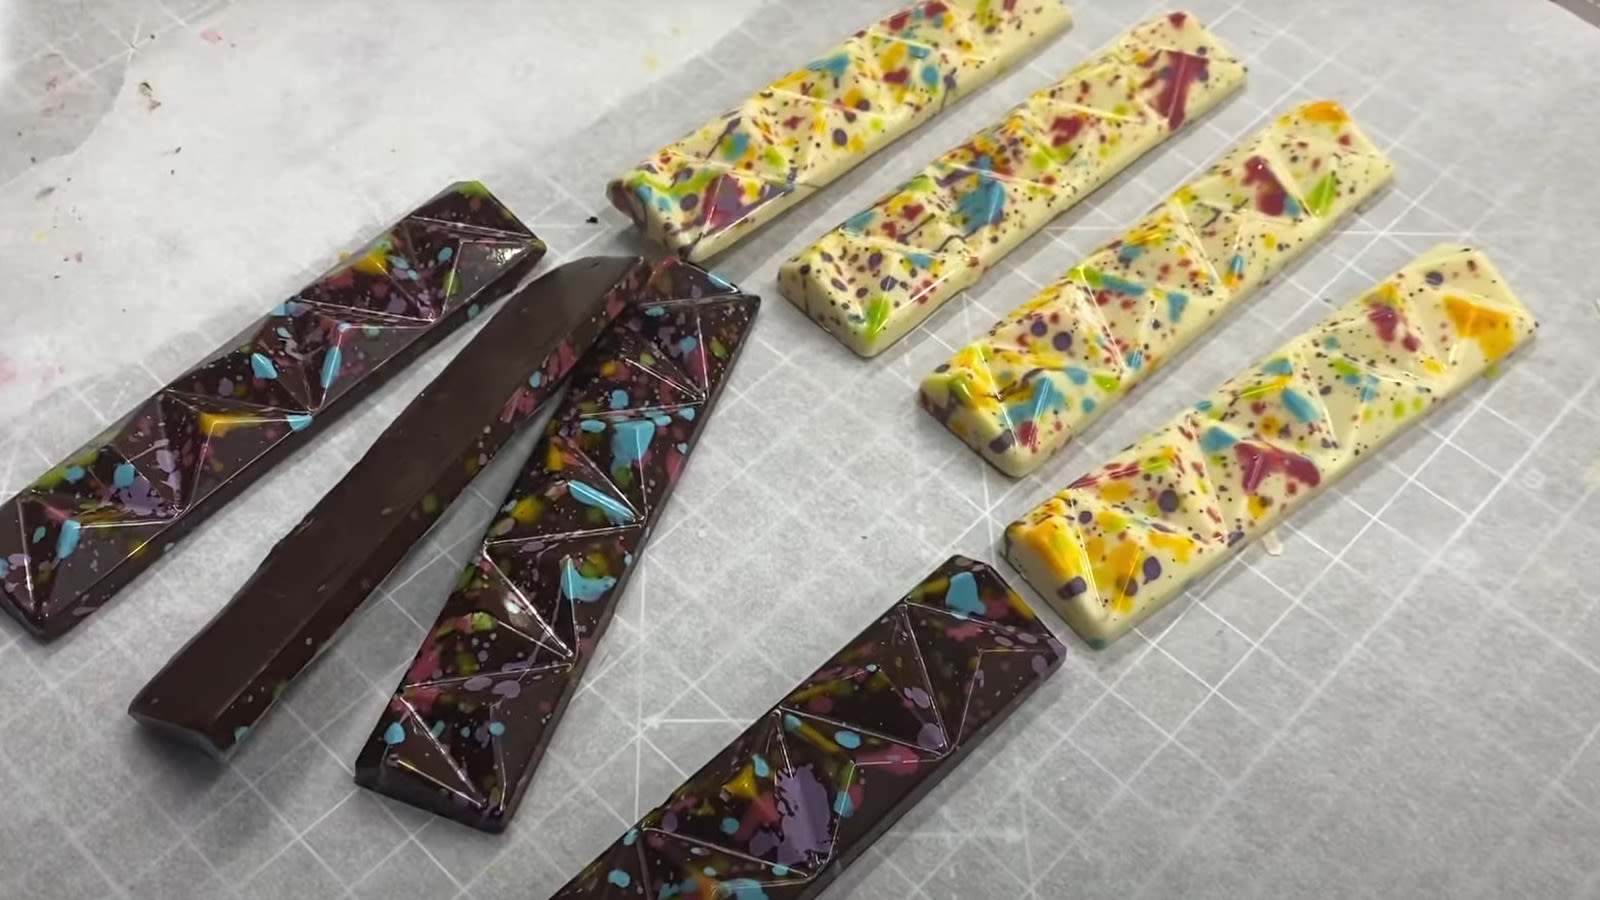 Give Homemade Chocolate Bars A Paint Splatter Effect With Just 2 Ingredients